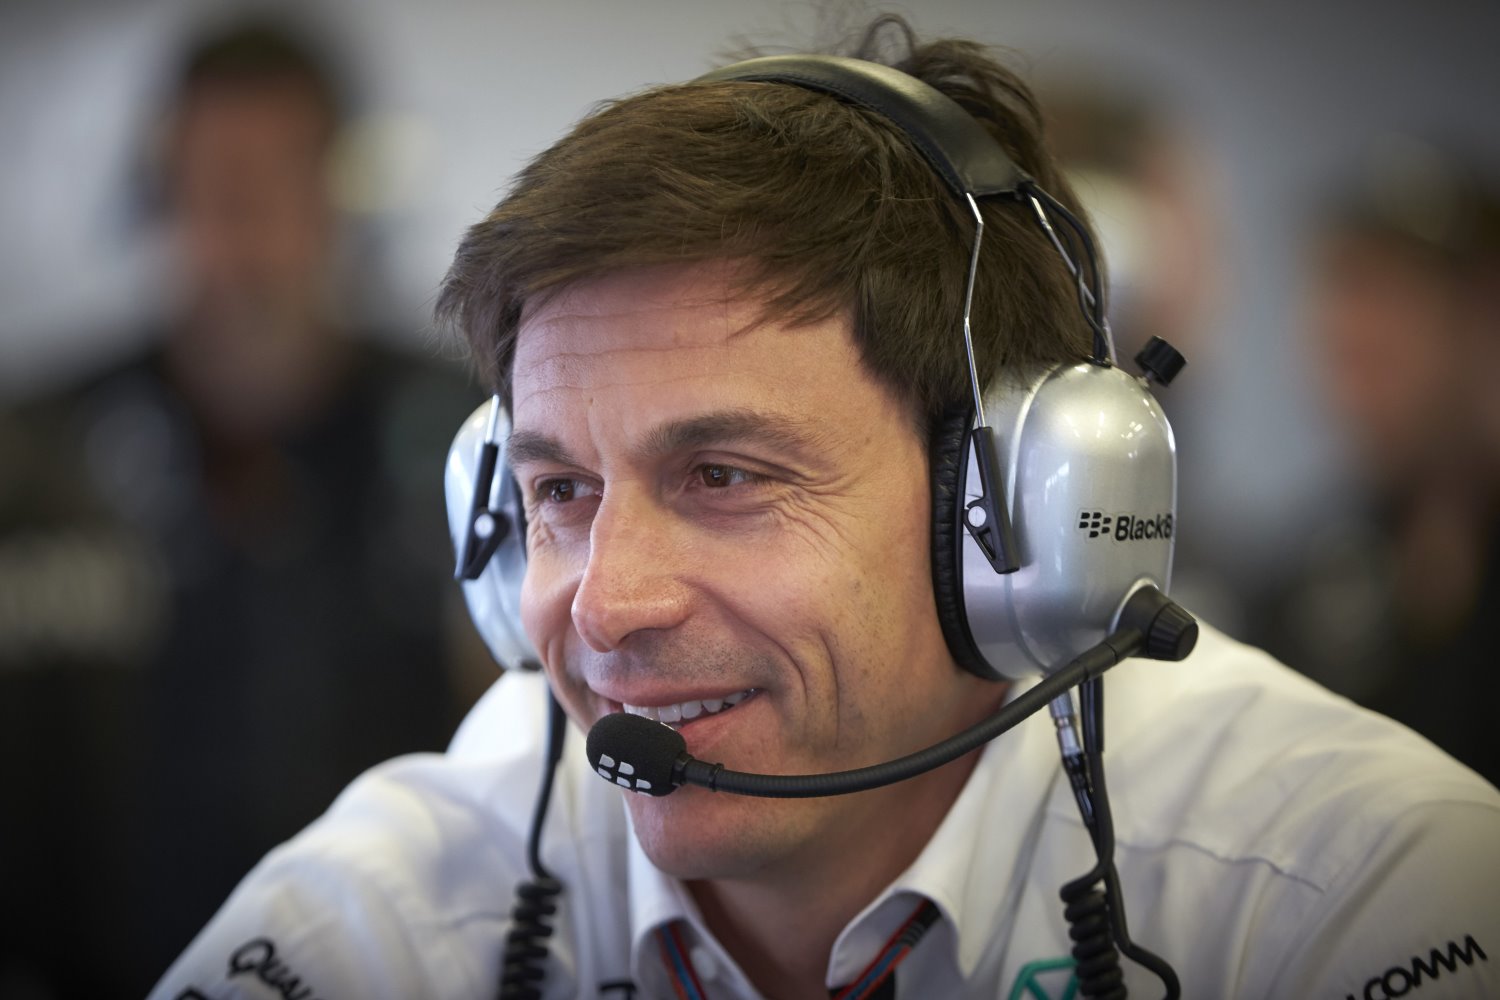 Toto Wolff: I will tell them the gap is closing, but last race the gap was the widest it's ever been.  Hehe